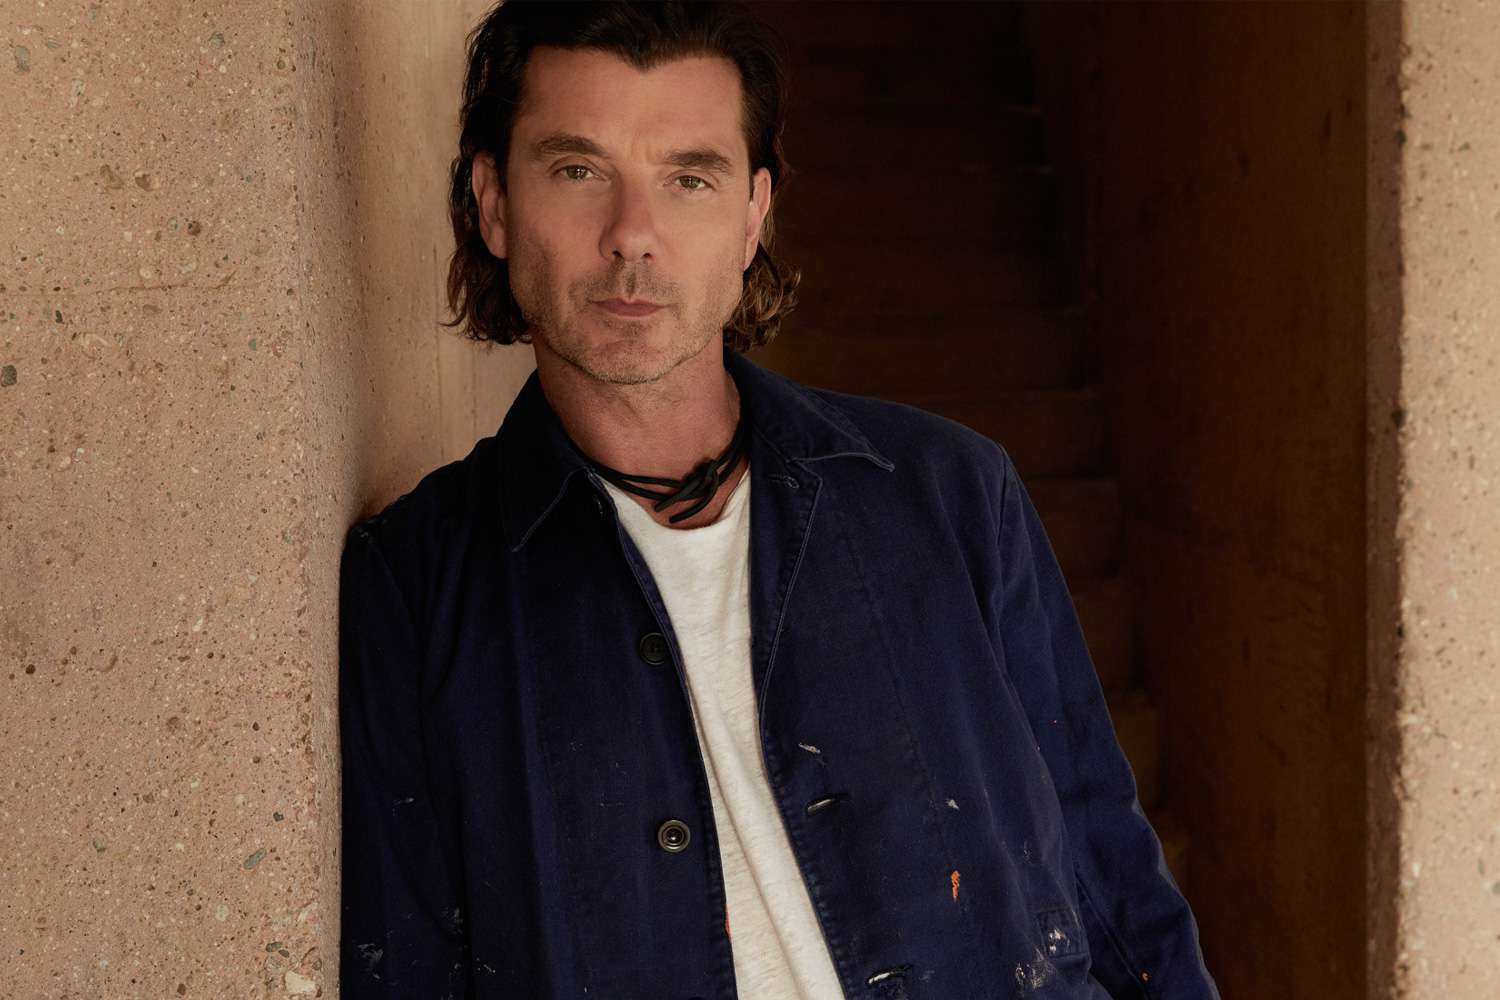 Gavin Rossdale Encourages Fans to Come 'See a Bit of Art' as Bush Hits the Road This Summer (Exclusive)